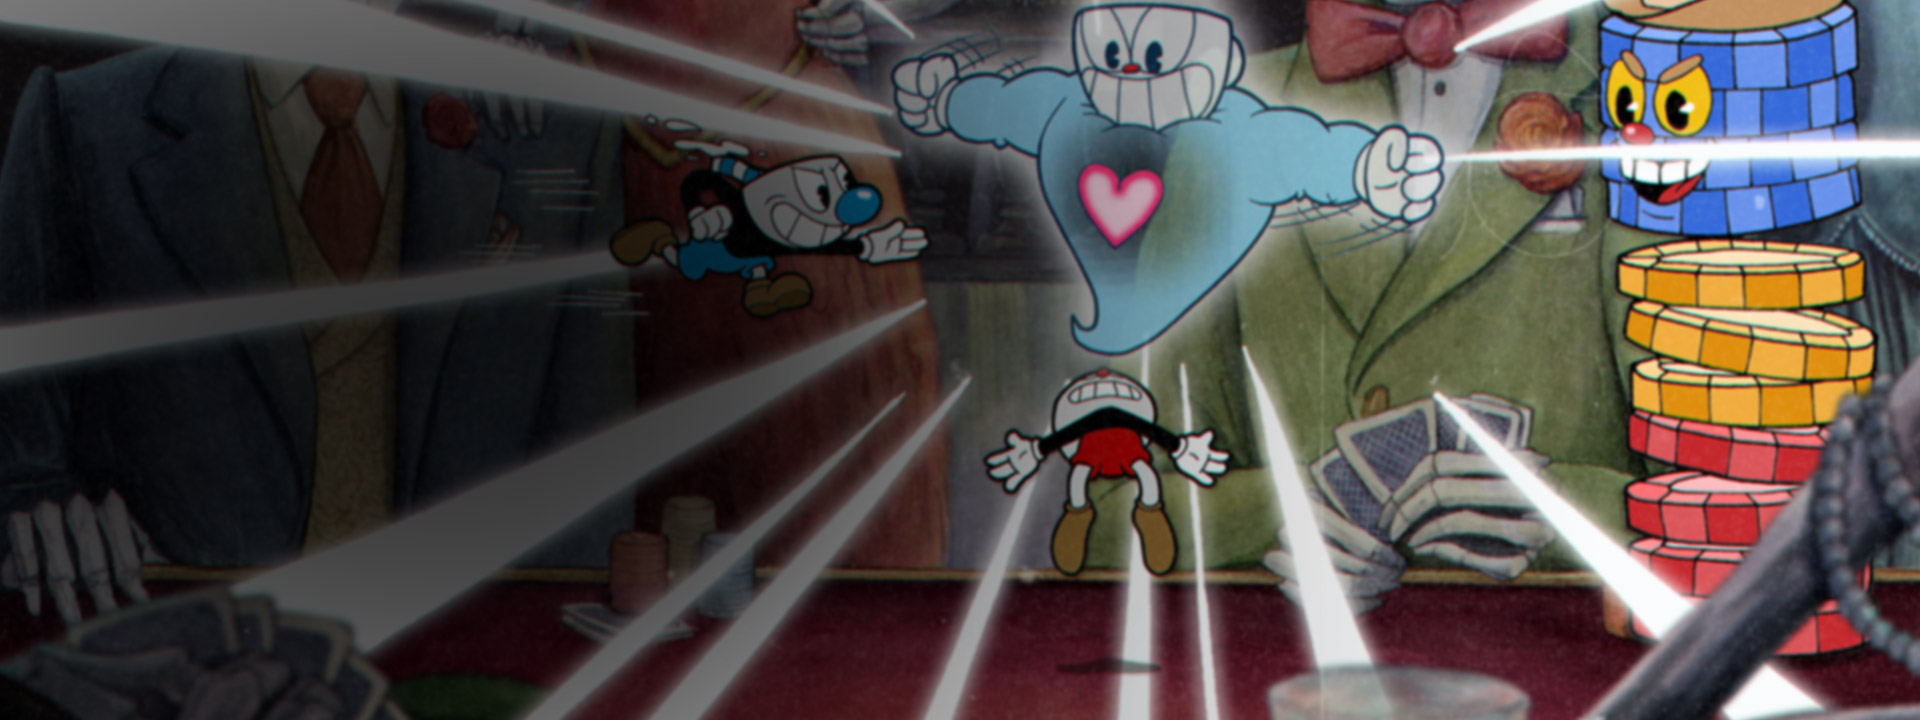 Mugman rushes to revive Cuphead on a dealer’s table